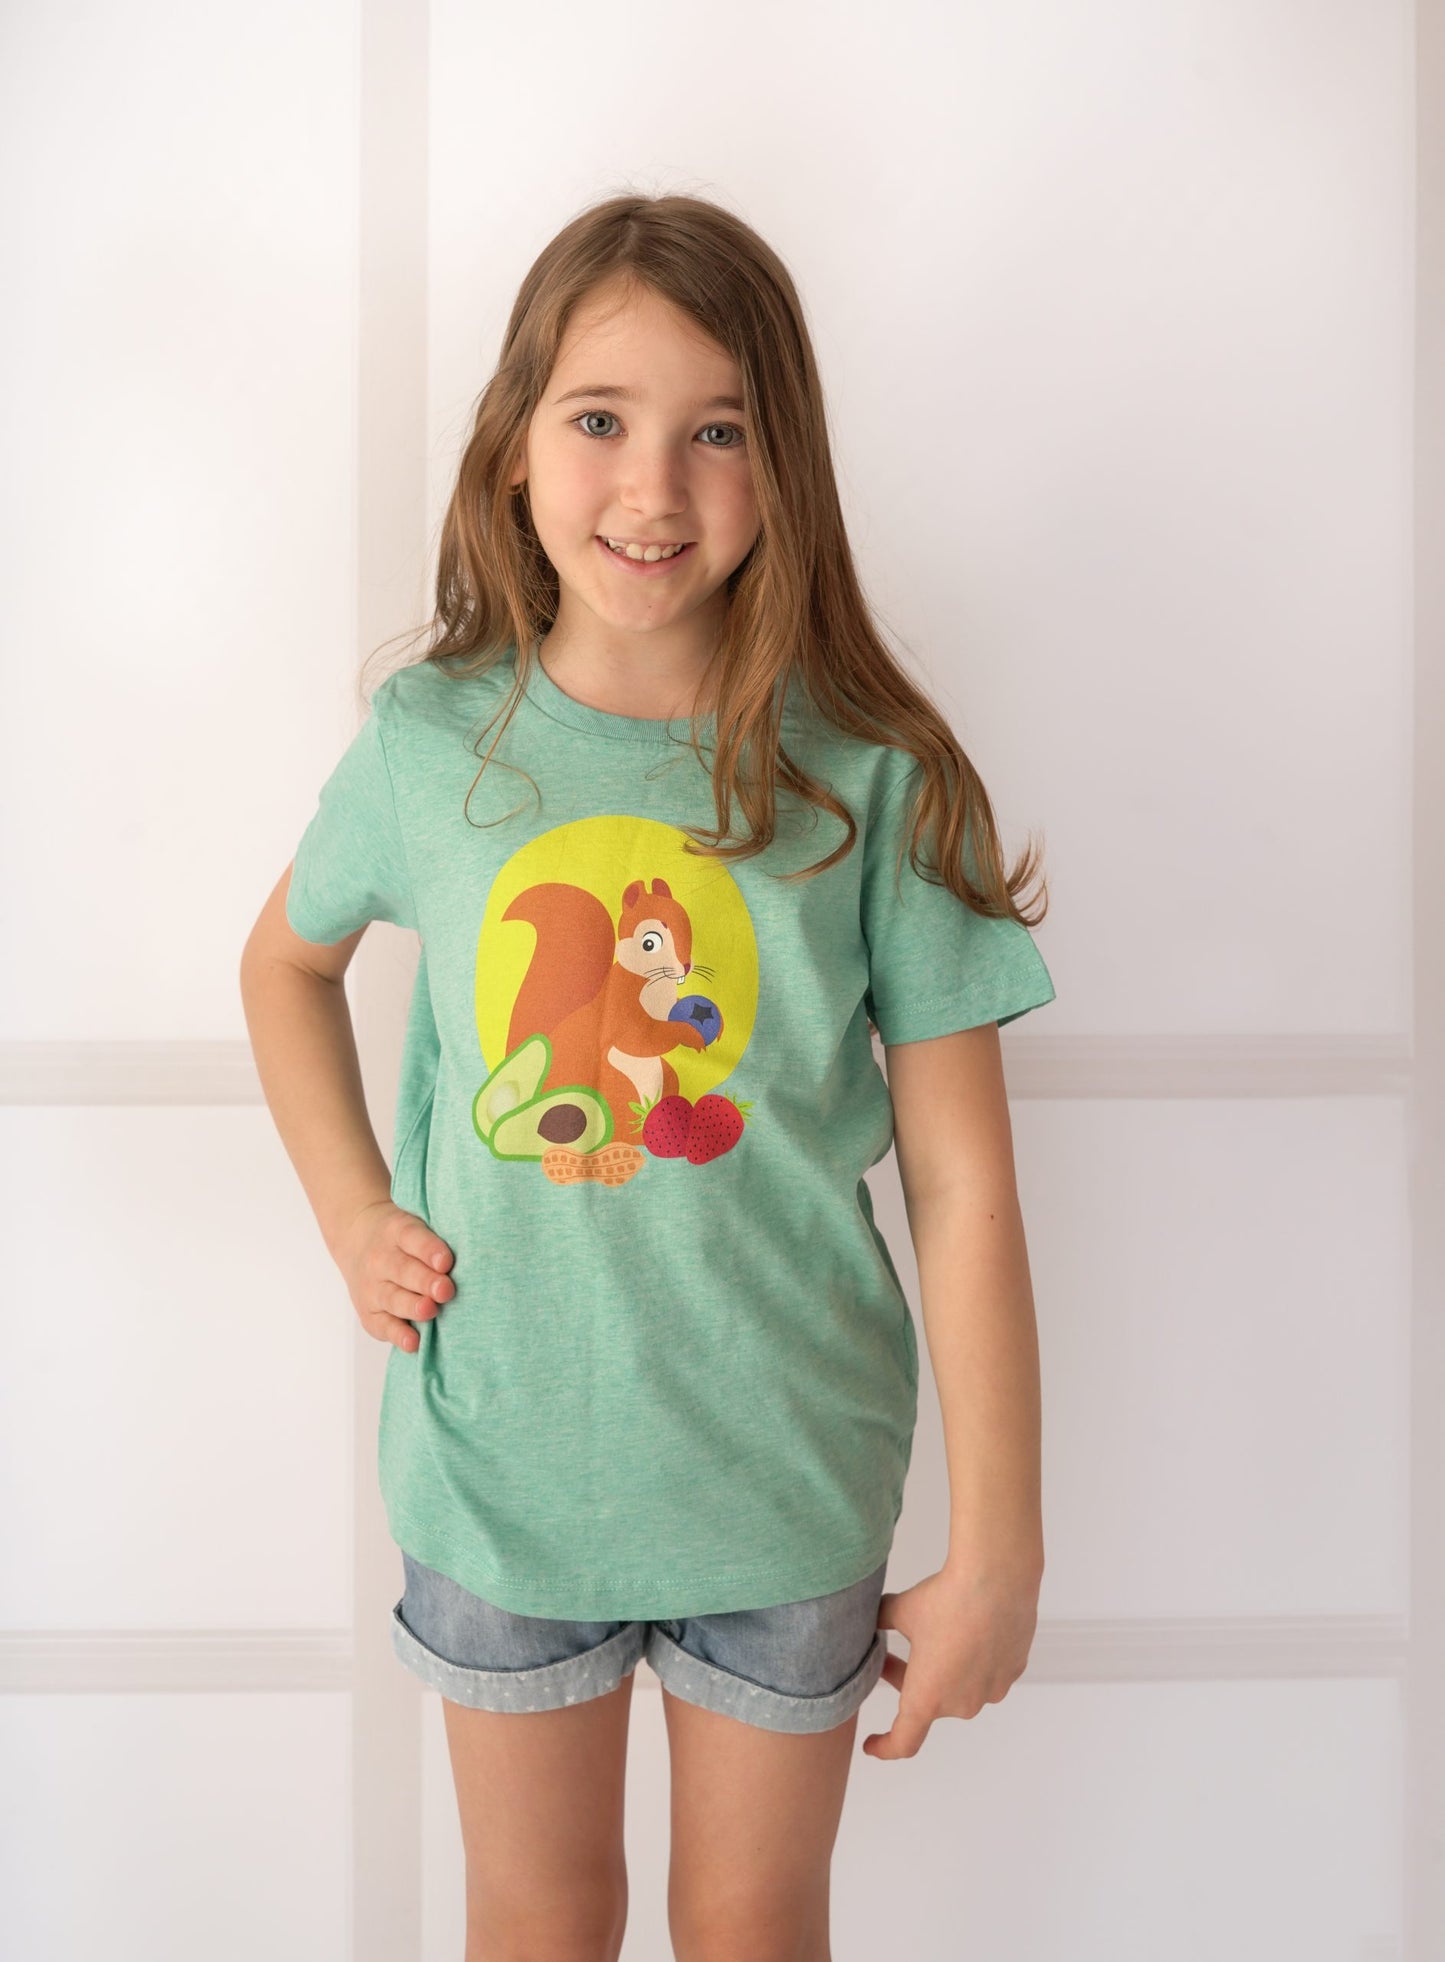 Squirrel Green Organic Cotton T-Shirt for Kids: Sustainable and Stylish T-Shirt